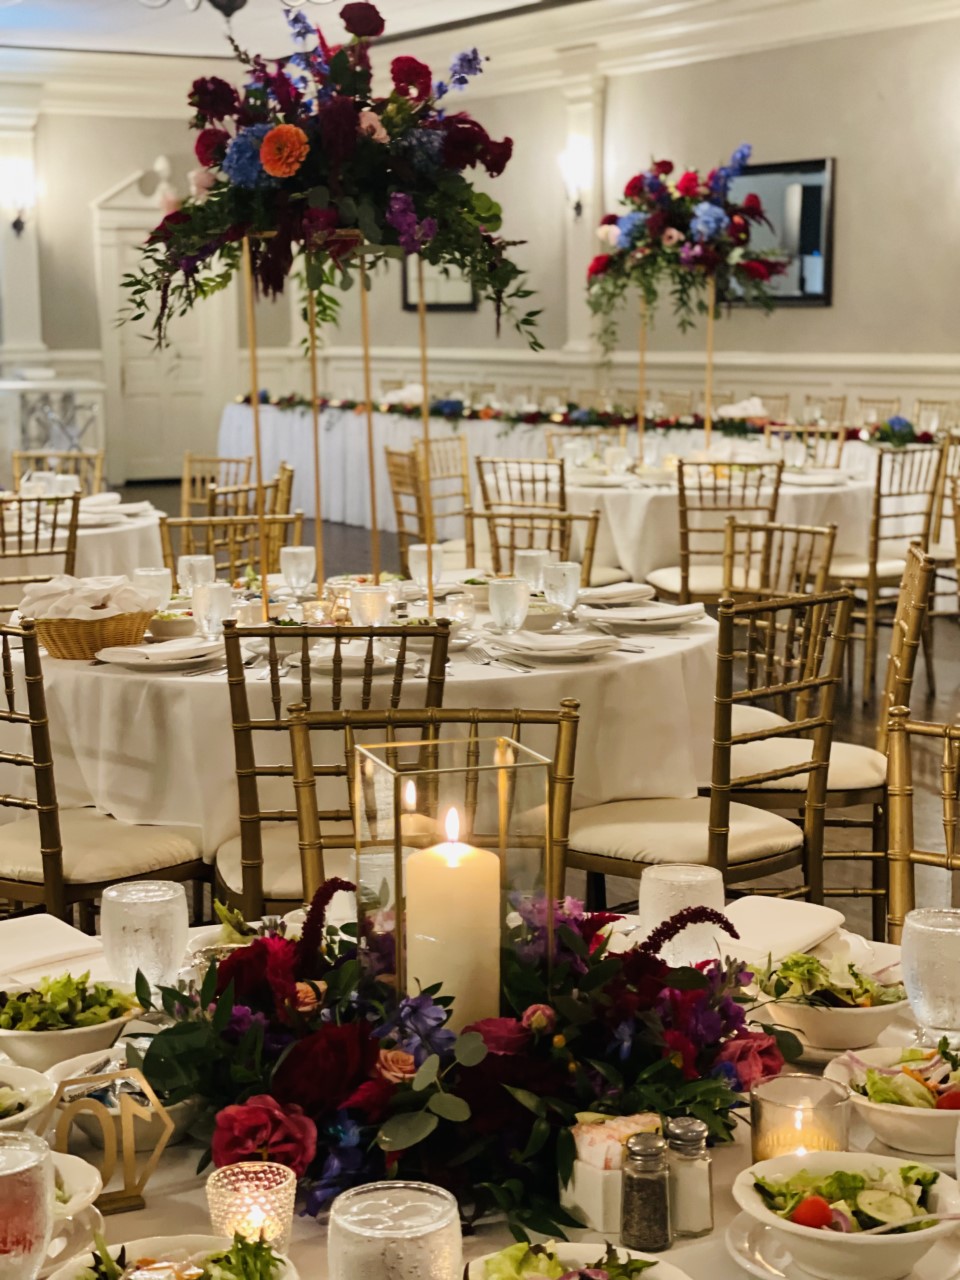 Wedding reception in the heritage ballroom at the Springside inn wedding venue in central New York